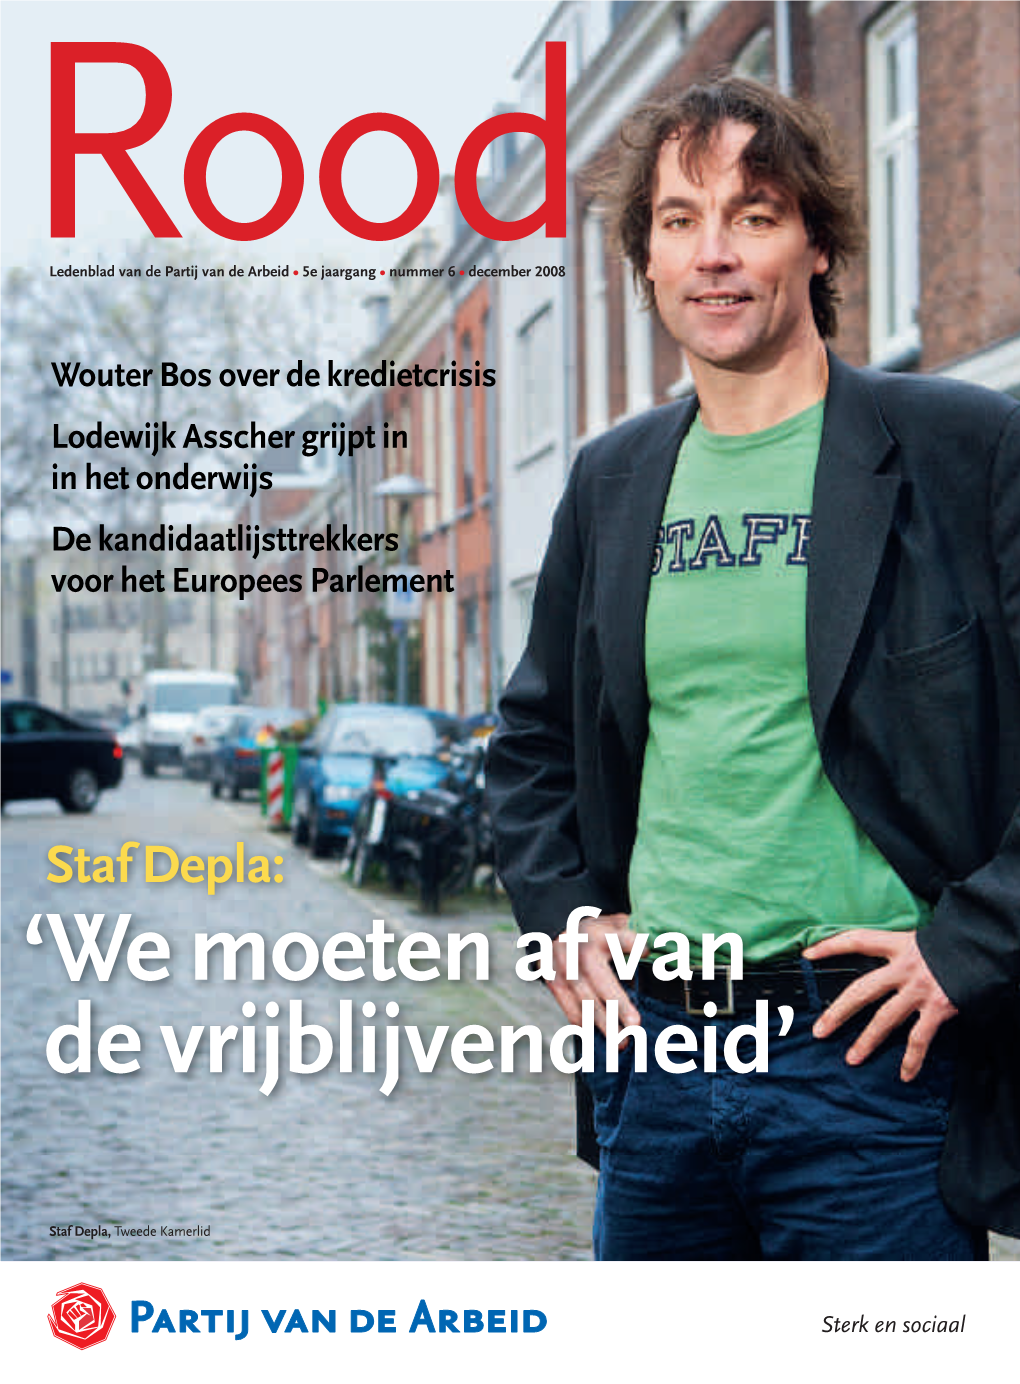 Rood 06-2008 A.Indd